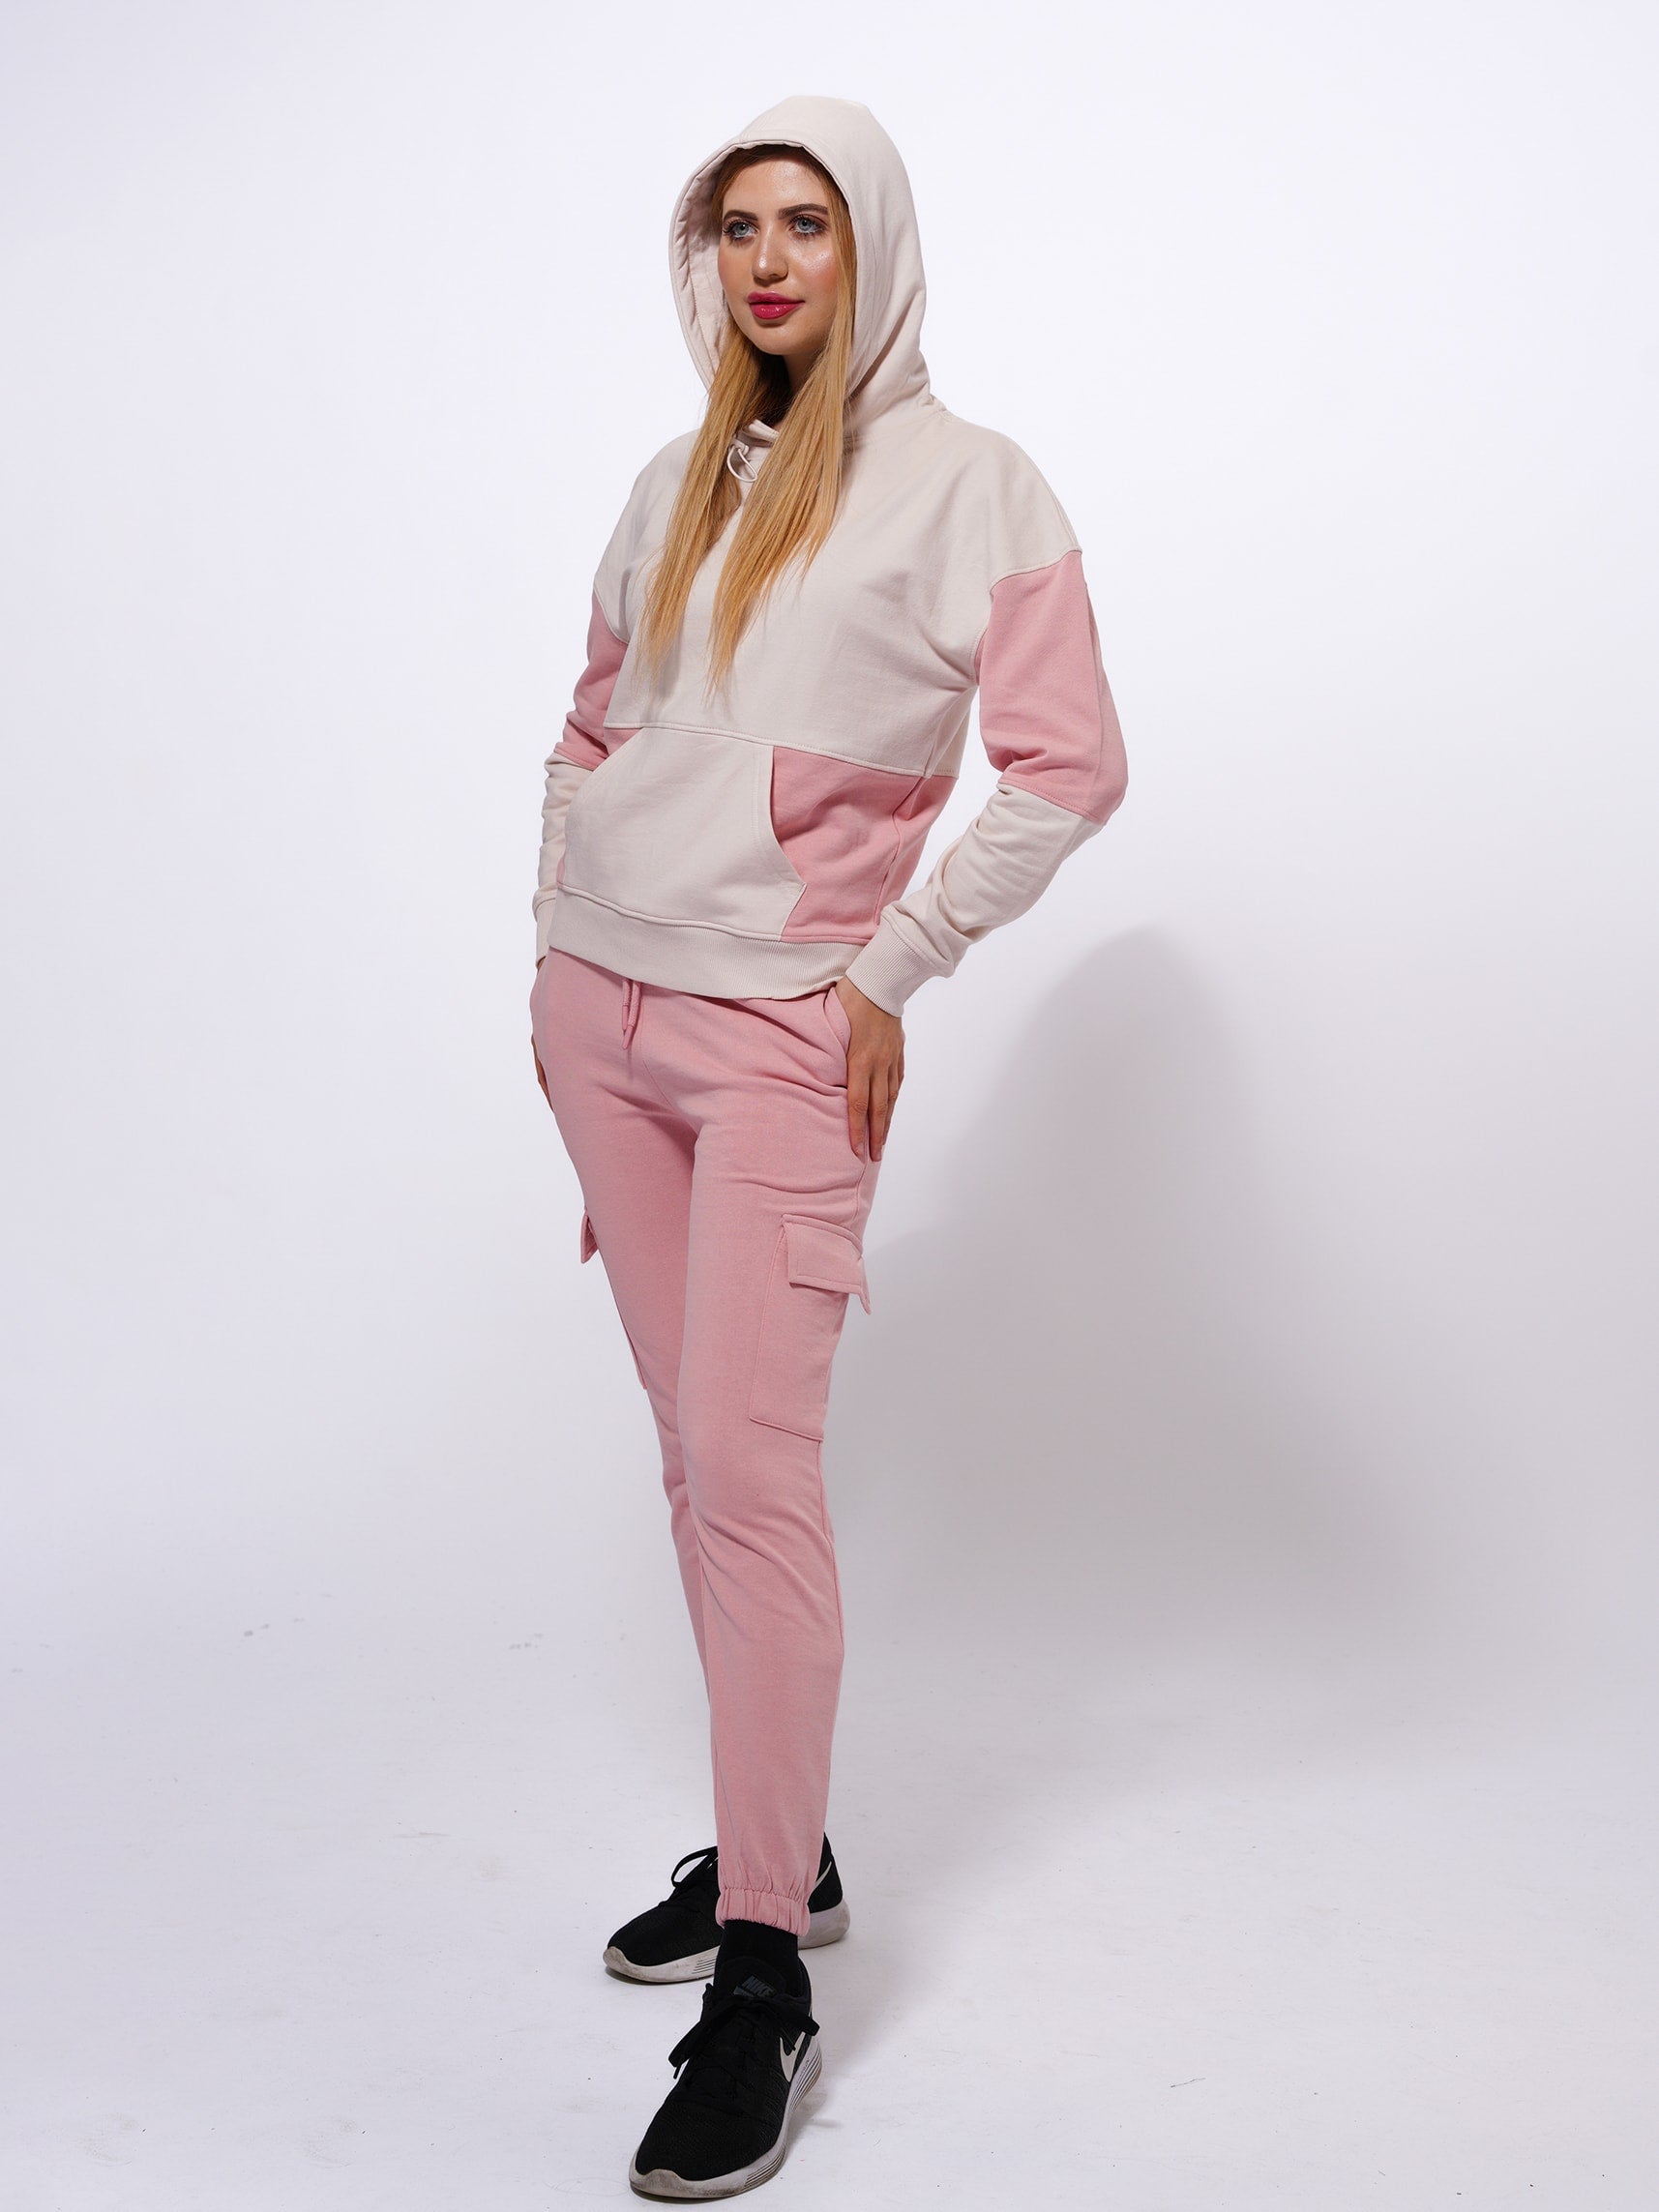 Women's Pink Hoodies & Joggers Set in Premium Cotton | Stylish Lounge and Relaxation Wear - inteblu